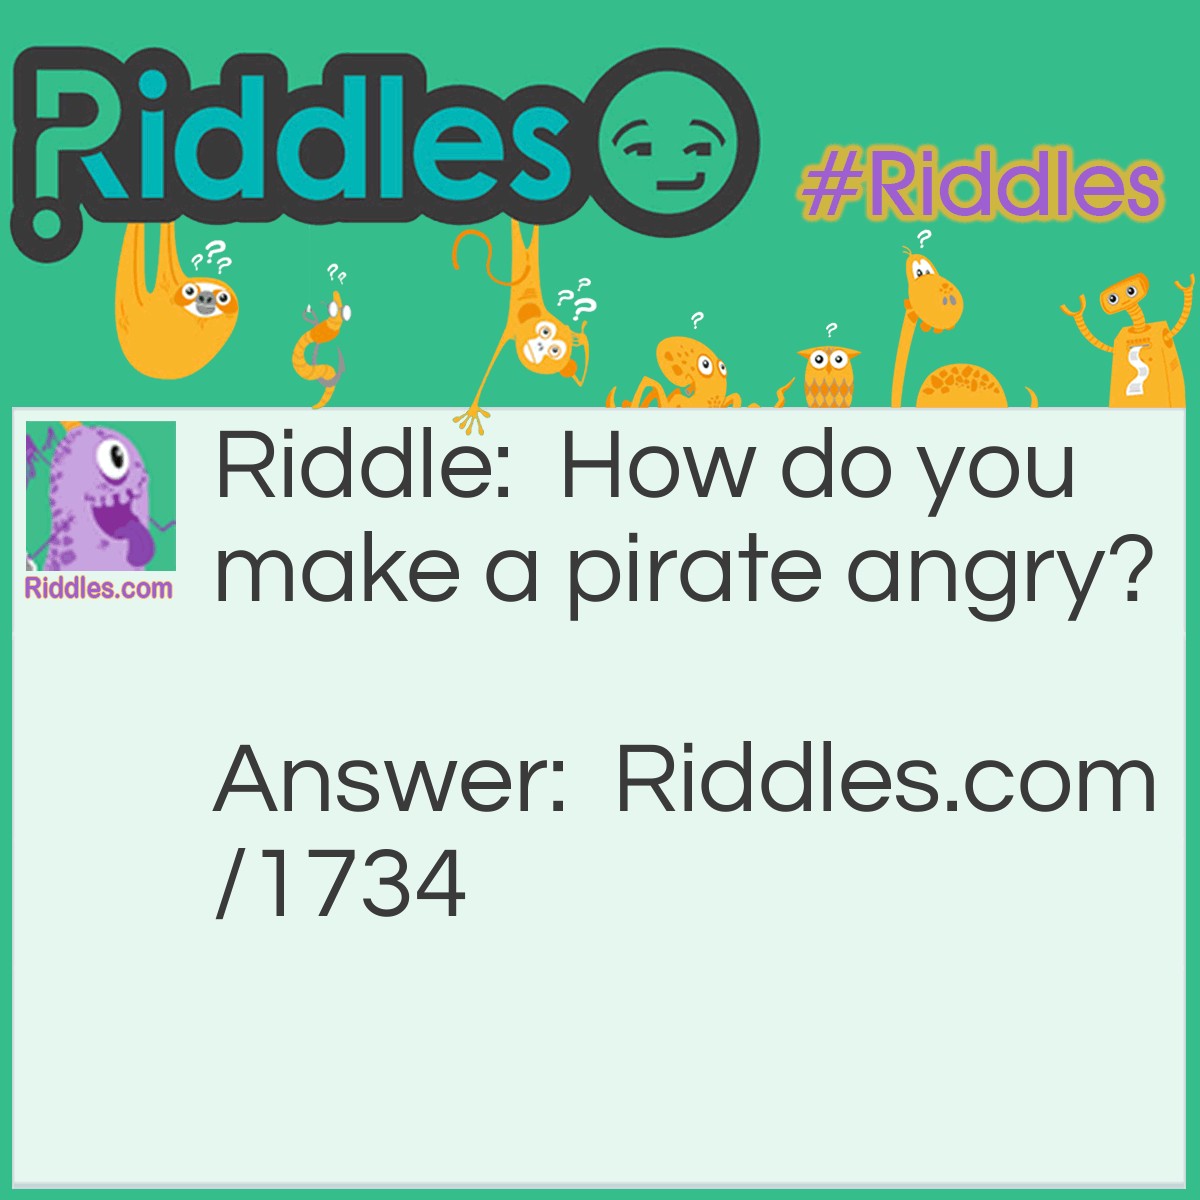 Riddle: How do you make a pirate angry? Answer: Take away the "p" and he becomes irate.